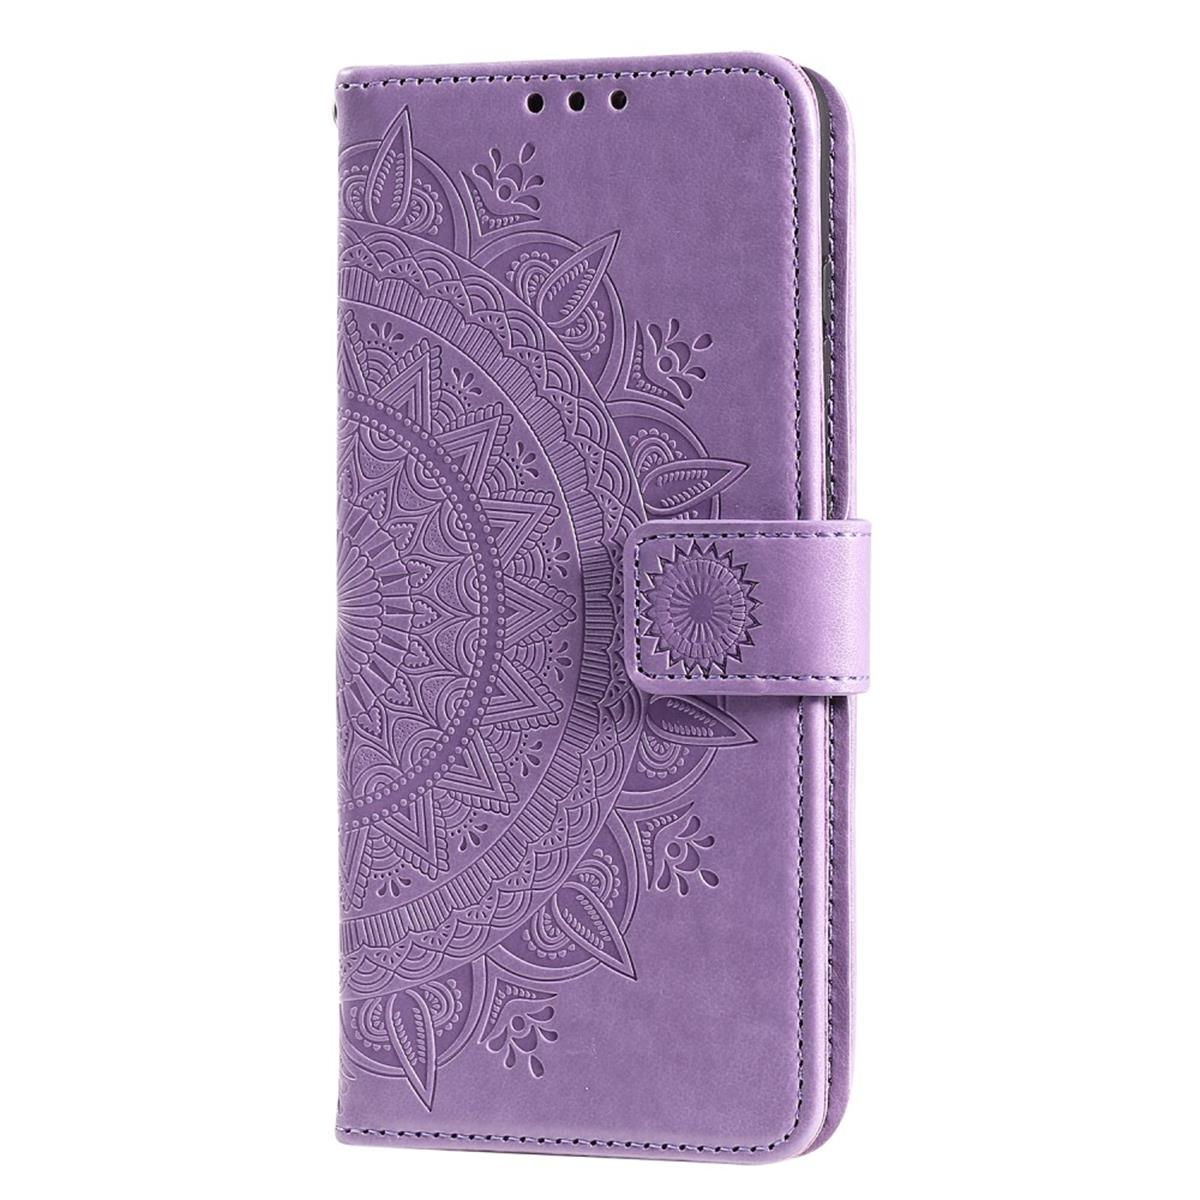 COVERKINGZ Klapphülle mit Mandala Muster, A31, Galaxy Samsung, Bookcover, Lila